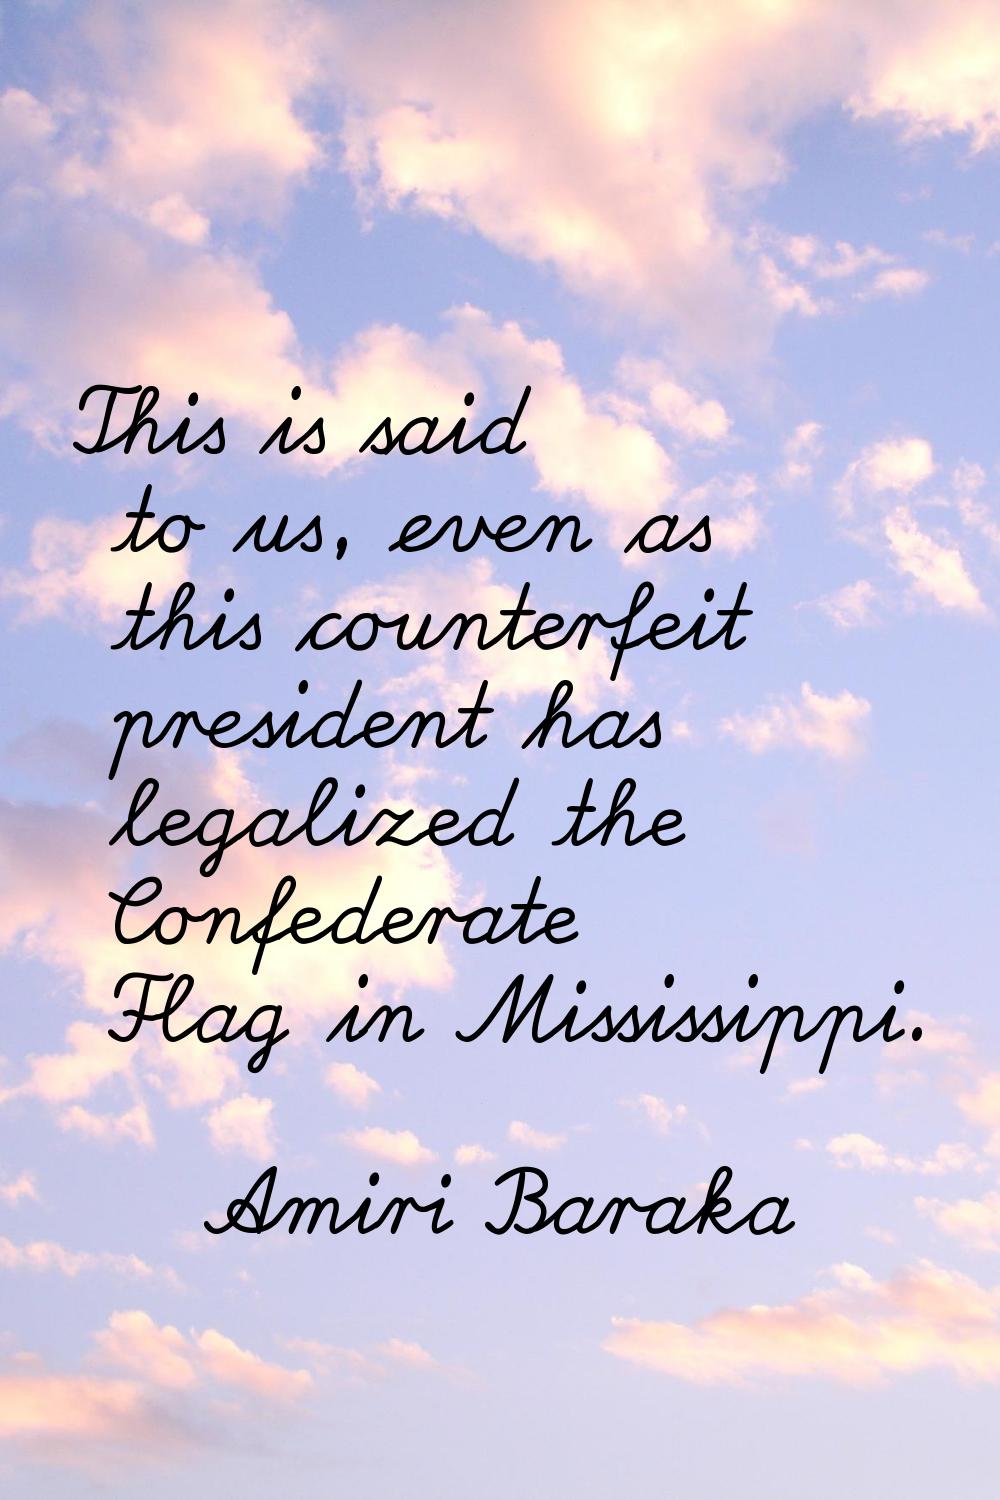 This is said to us, even as this counterfeit president has legalized the Confederate Flag in Missis